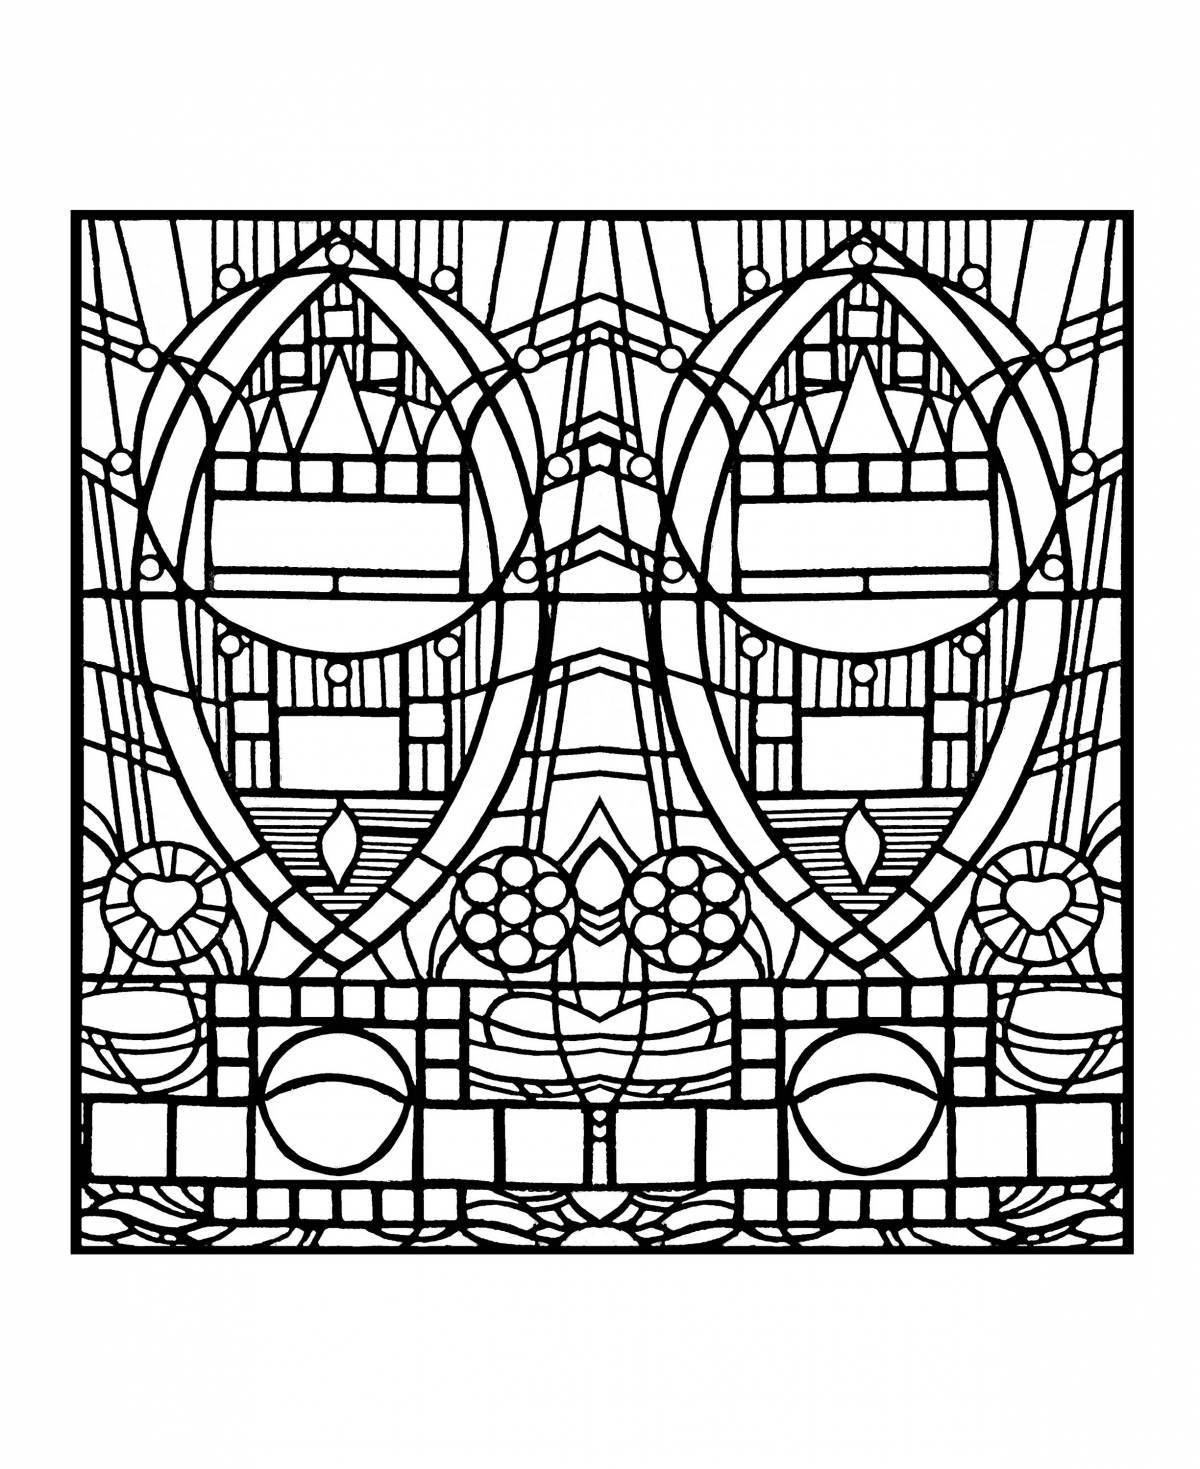 Coloring page dazzling stained glass windows